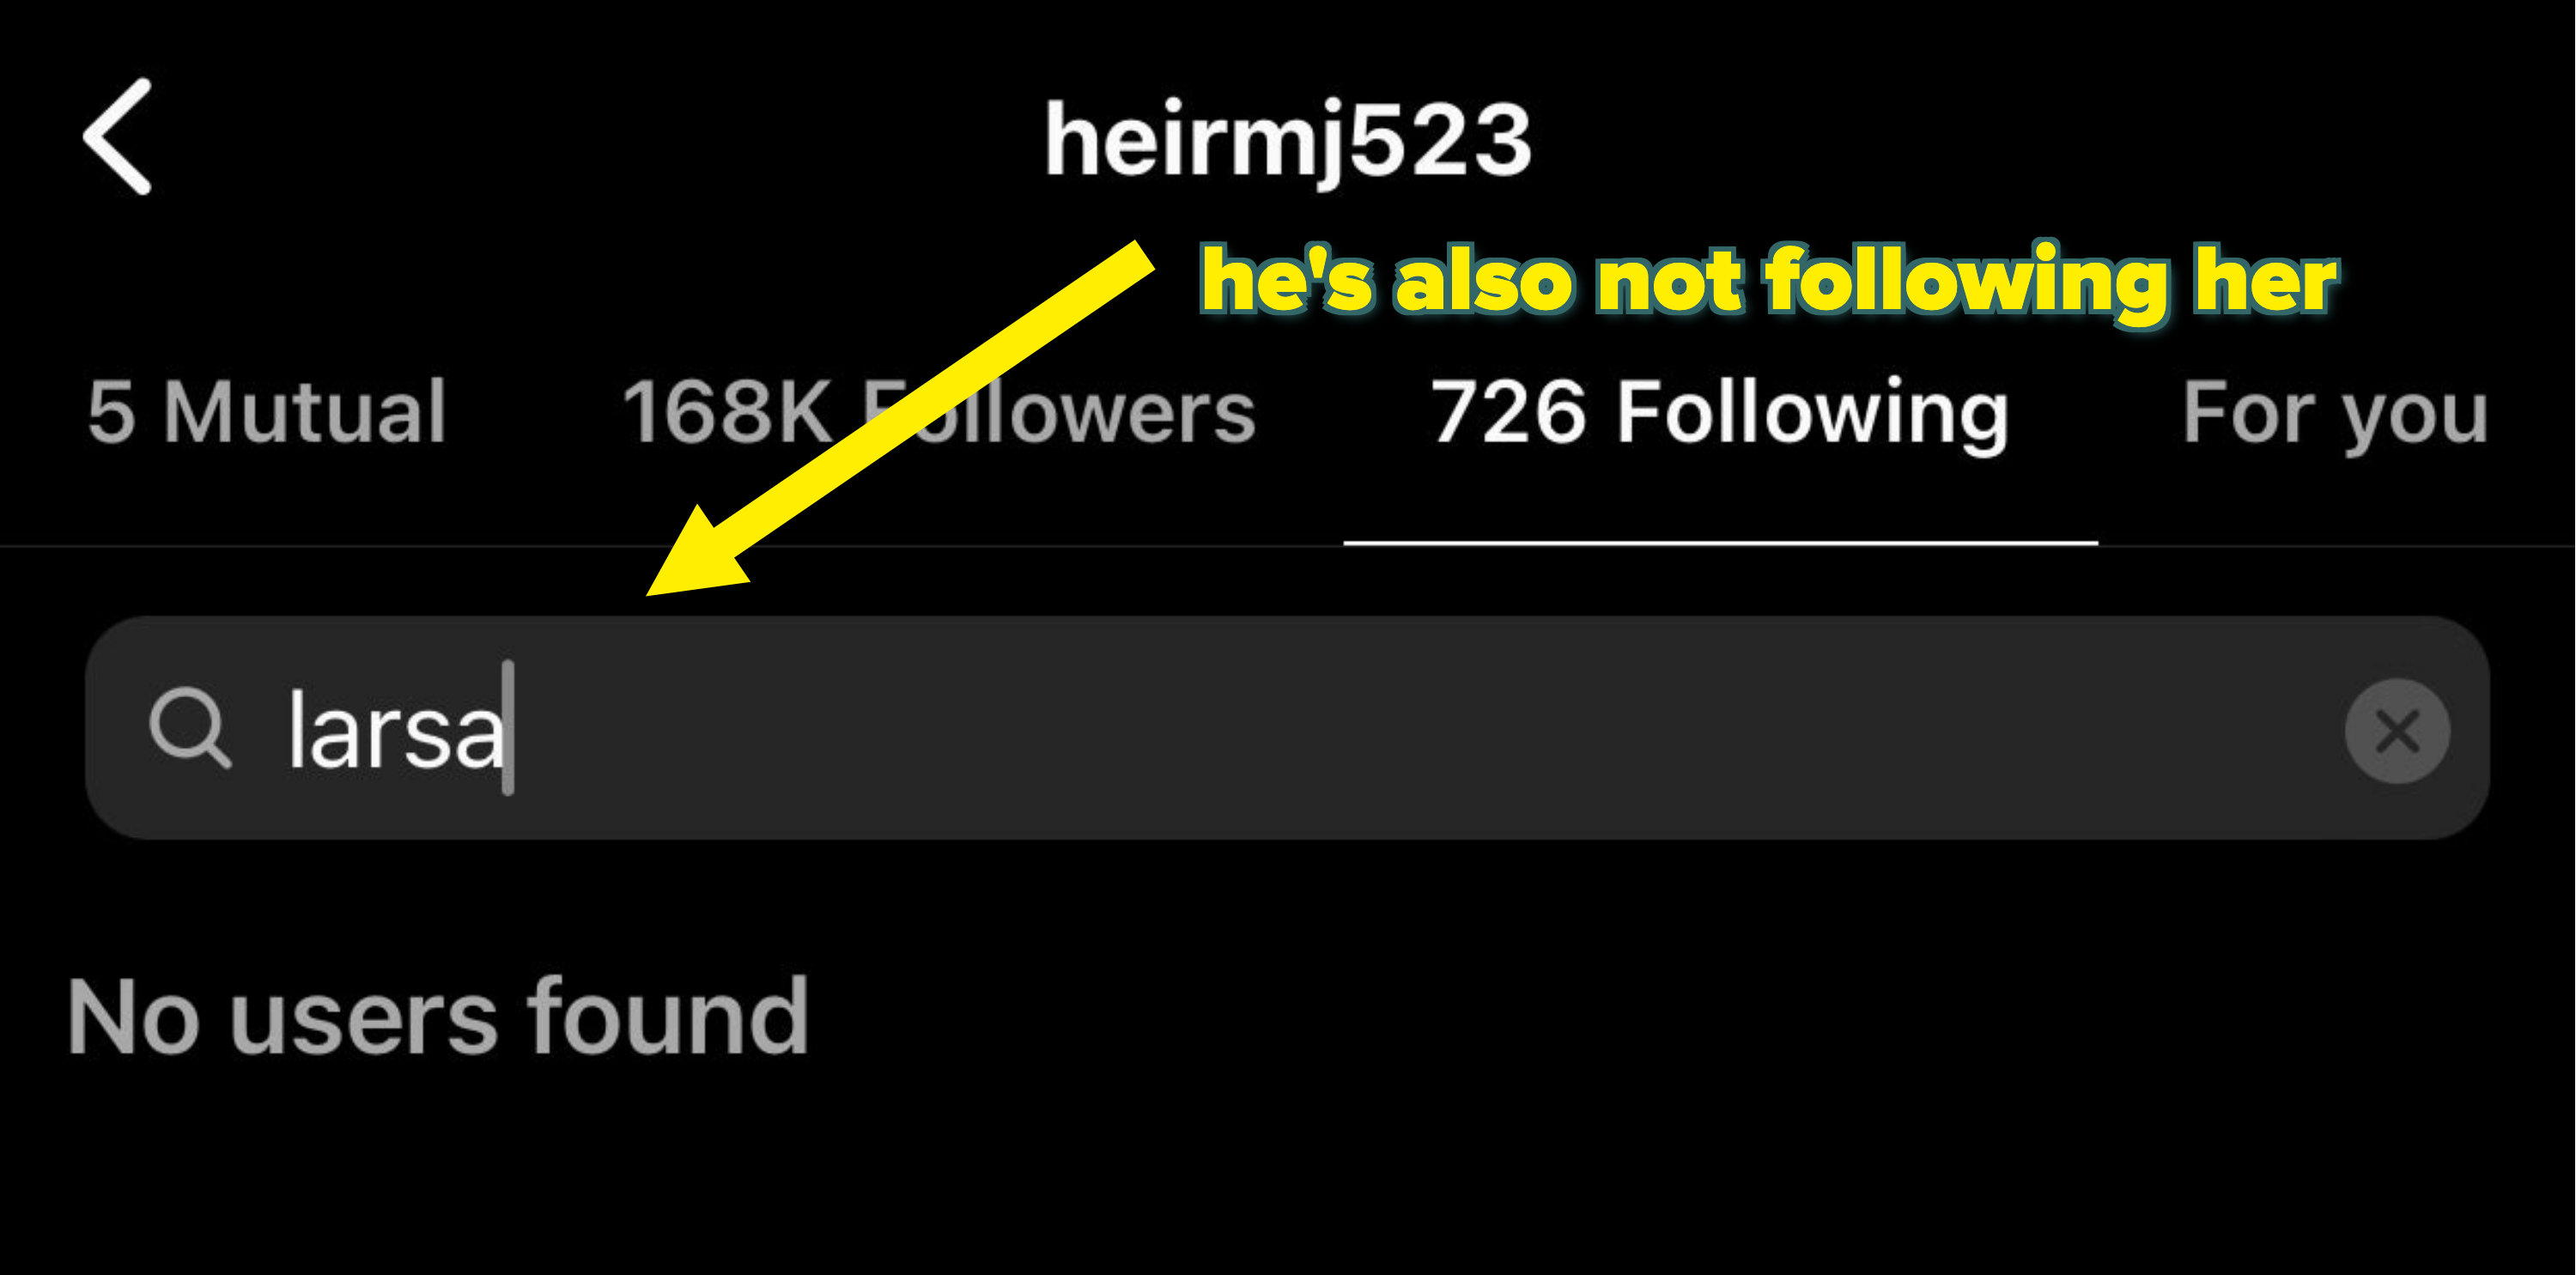 Social media screen with a user&#x27;s profile showing followers and a search bar indicating &quot;No users found&quot; for the searched name